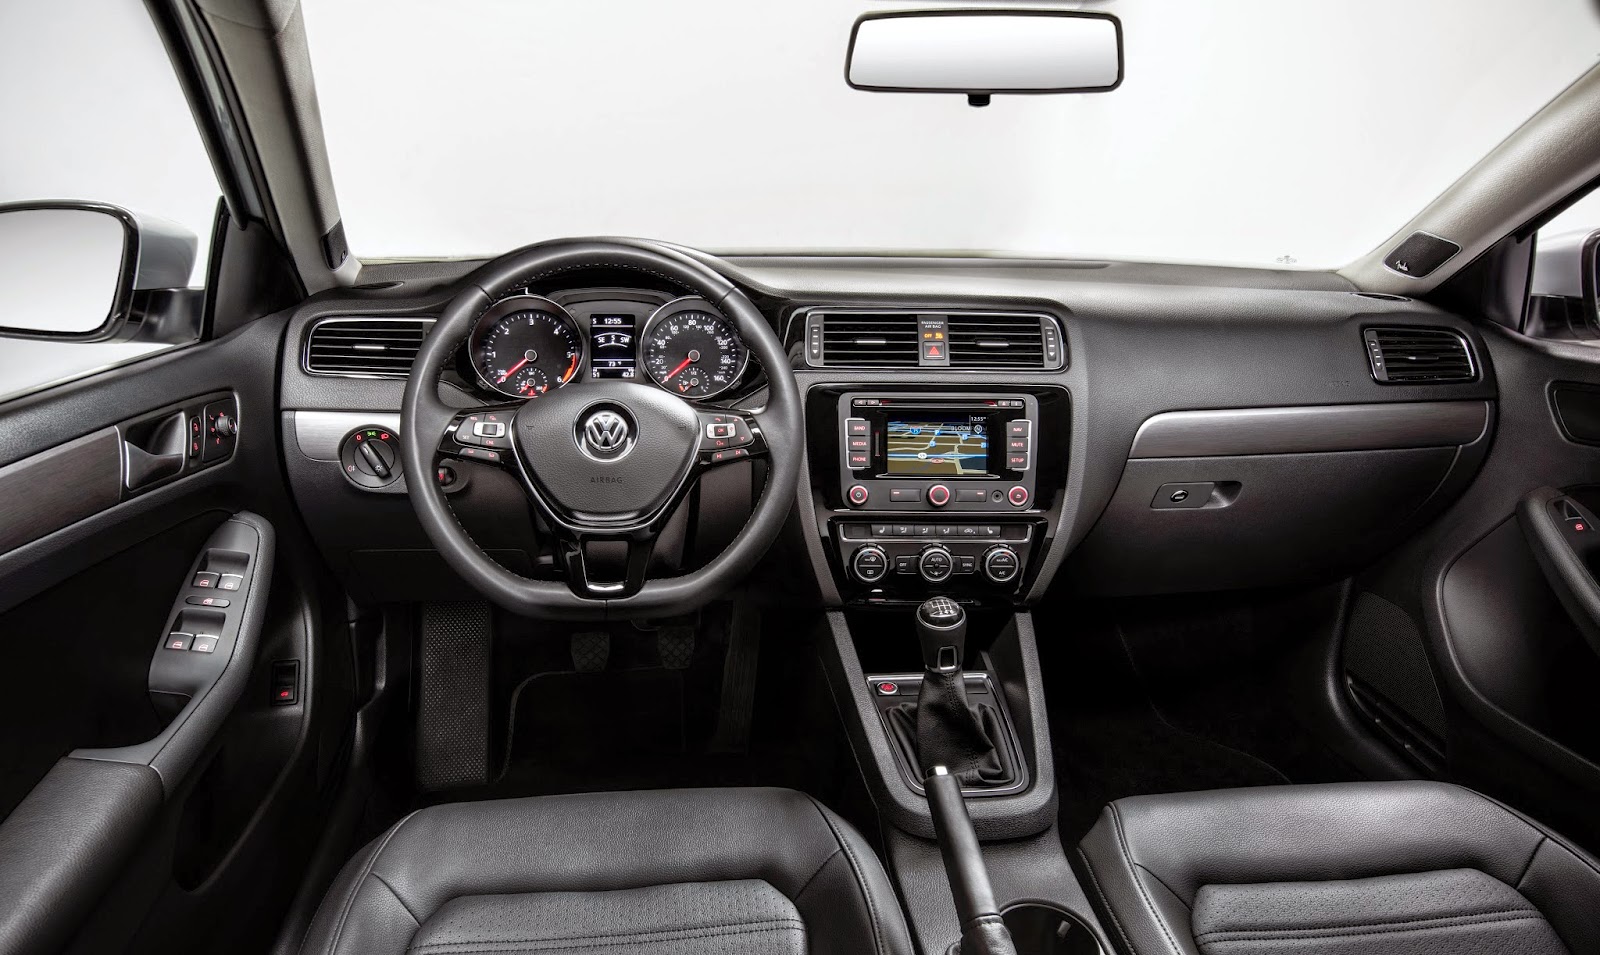 Getting More With Less: The 2015 Volkswagen Jetta 1.8T